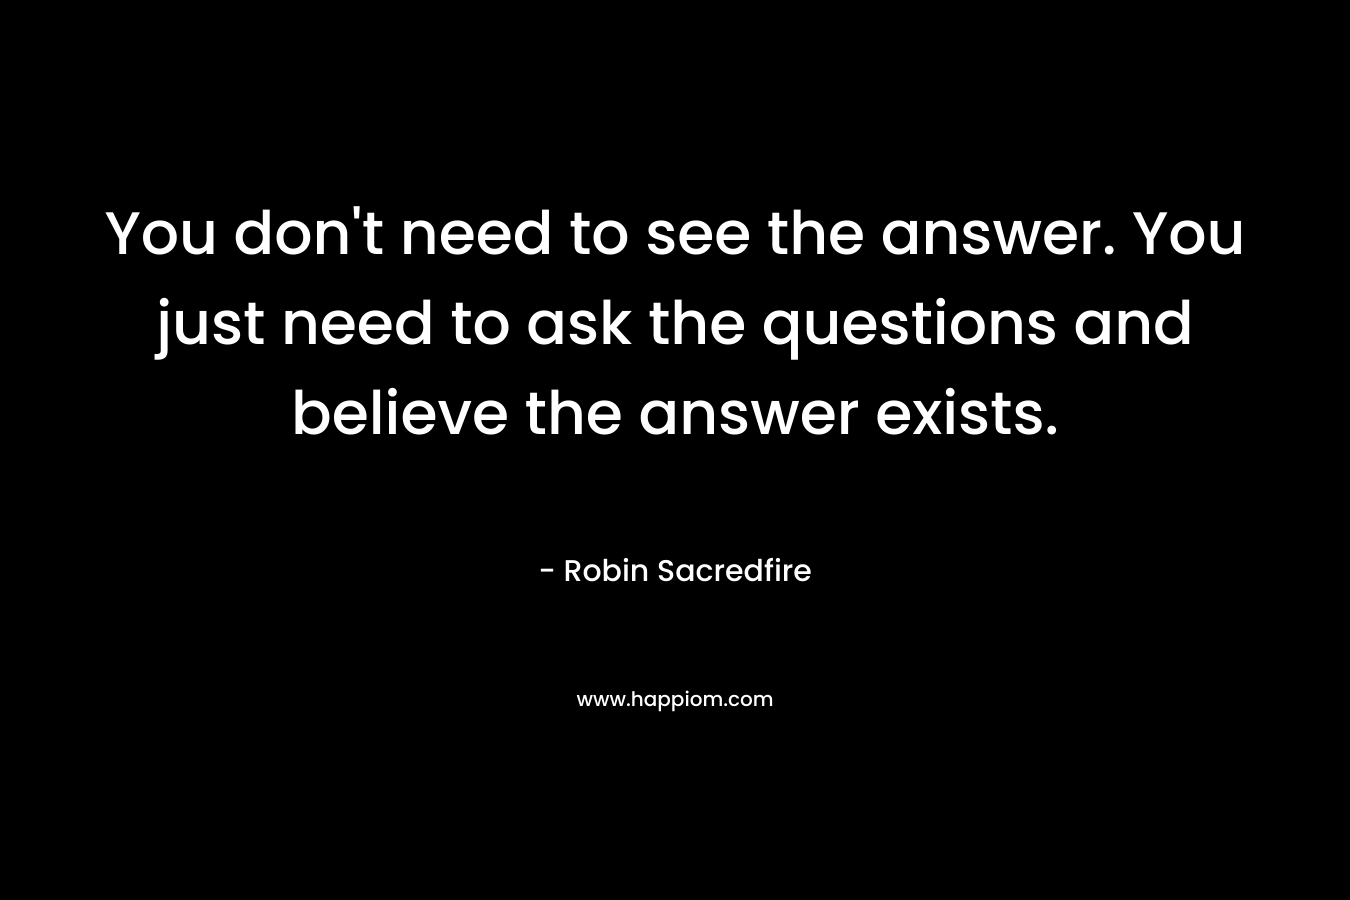 You don’t need to see the answer. You just need to ask the questions and believe the answer exists. – Robin Sacredfire